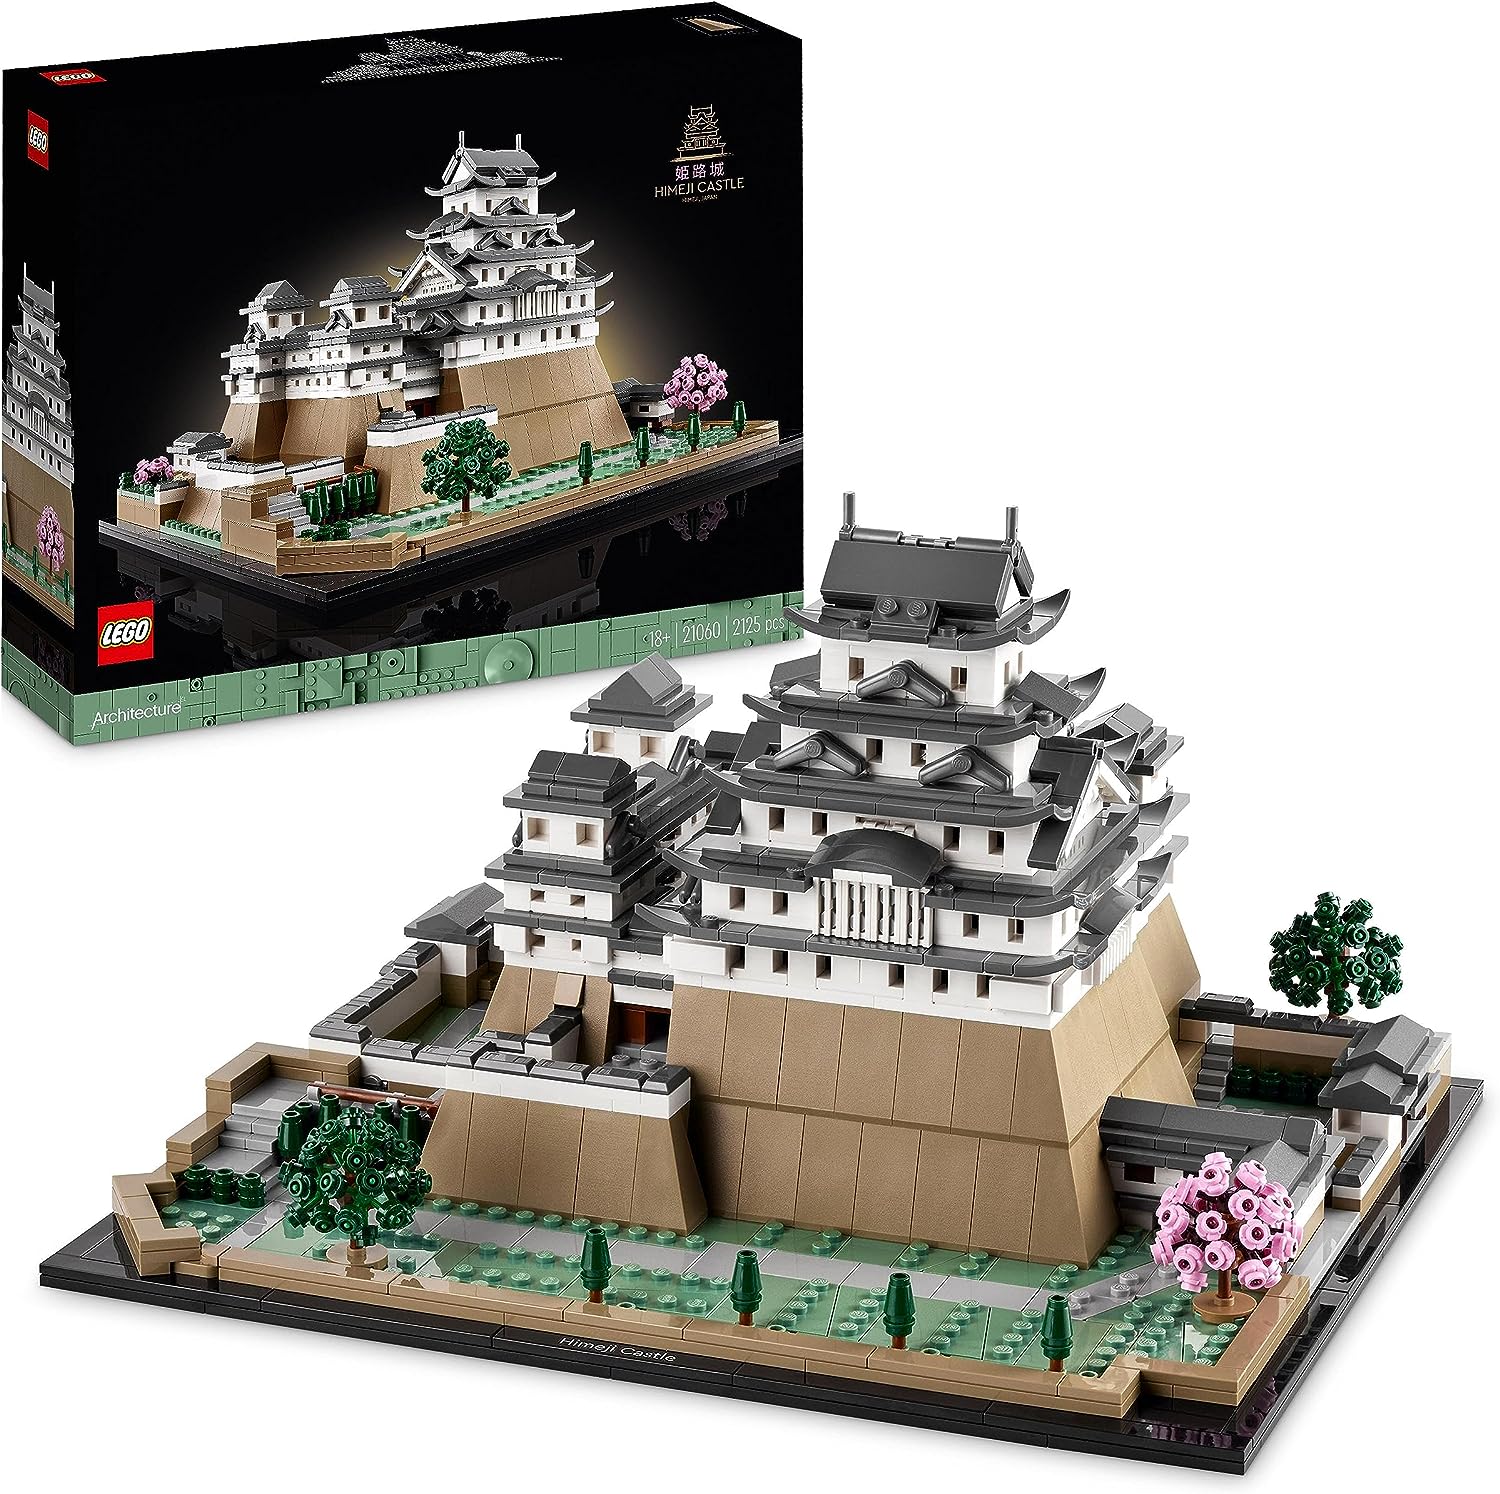 LEGO 21060 Architecture Himeji Castle Model Kit Adult Landmark Collection Set for Fans of Creative Gardening and Japanese Culture, Cherry Blossom Tree Gift for Him and Her